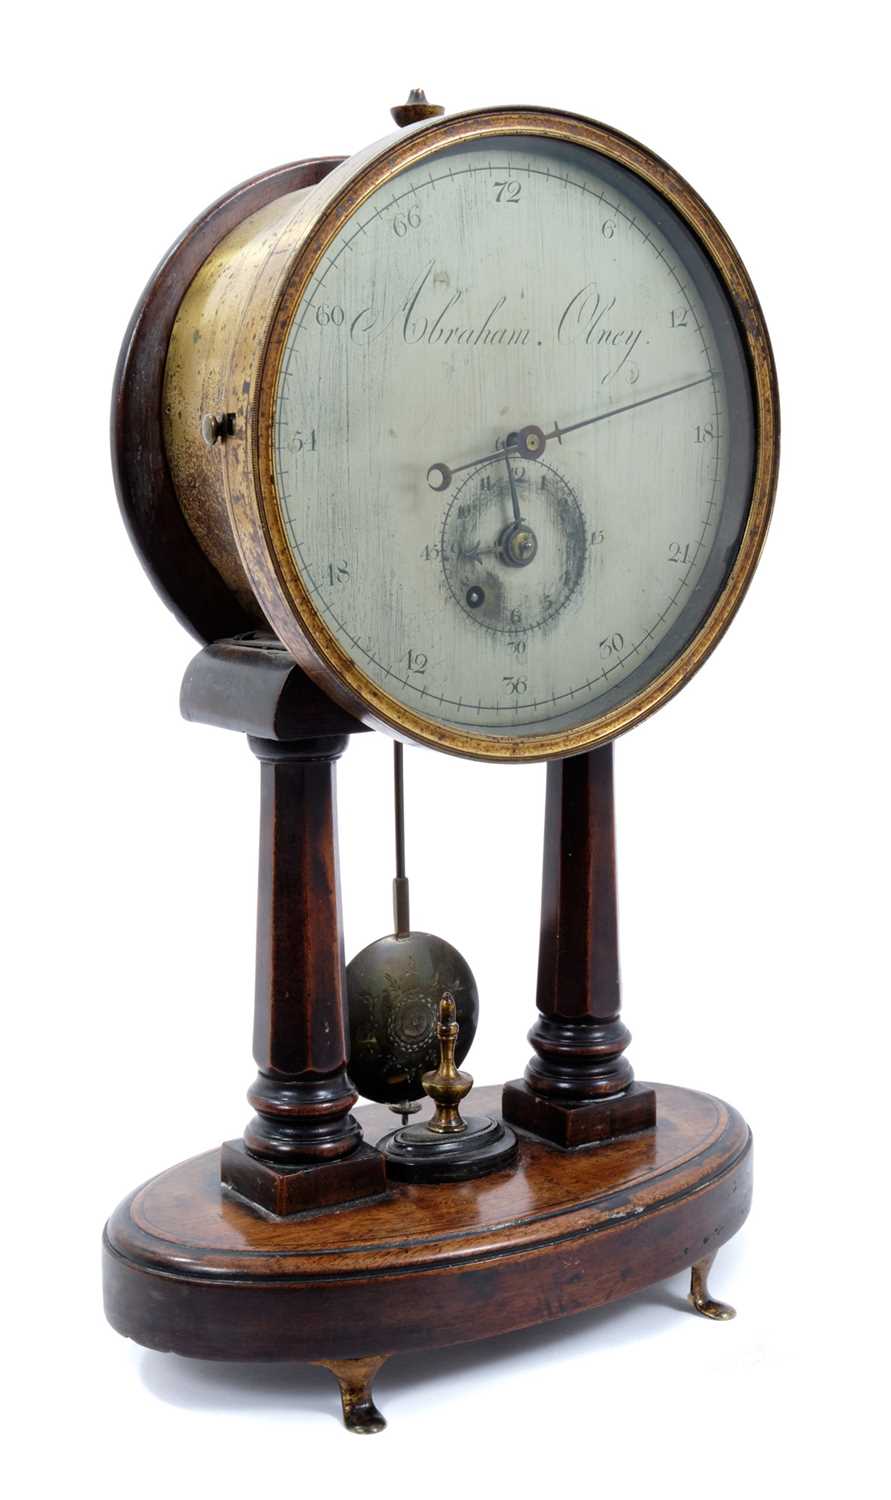 Unusual 19th century timepiece by Abraham, Olney - Image 2 of 14